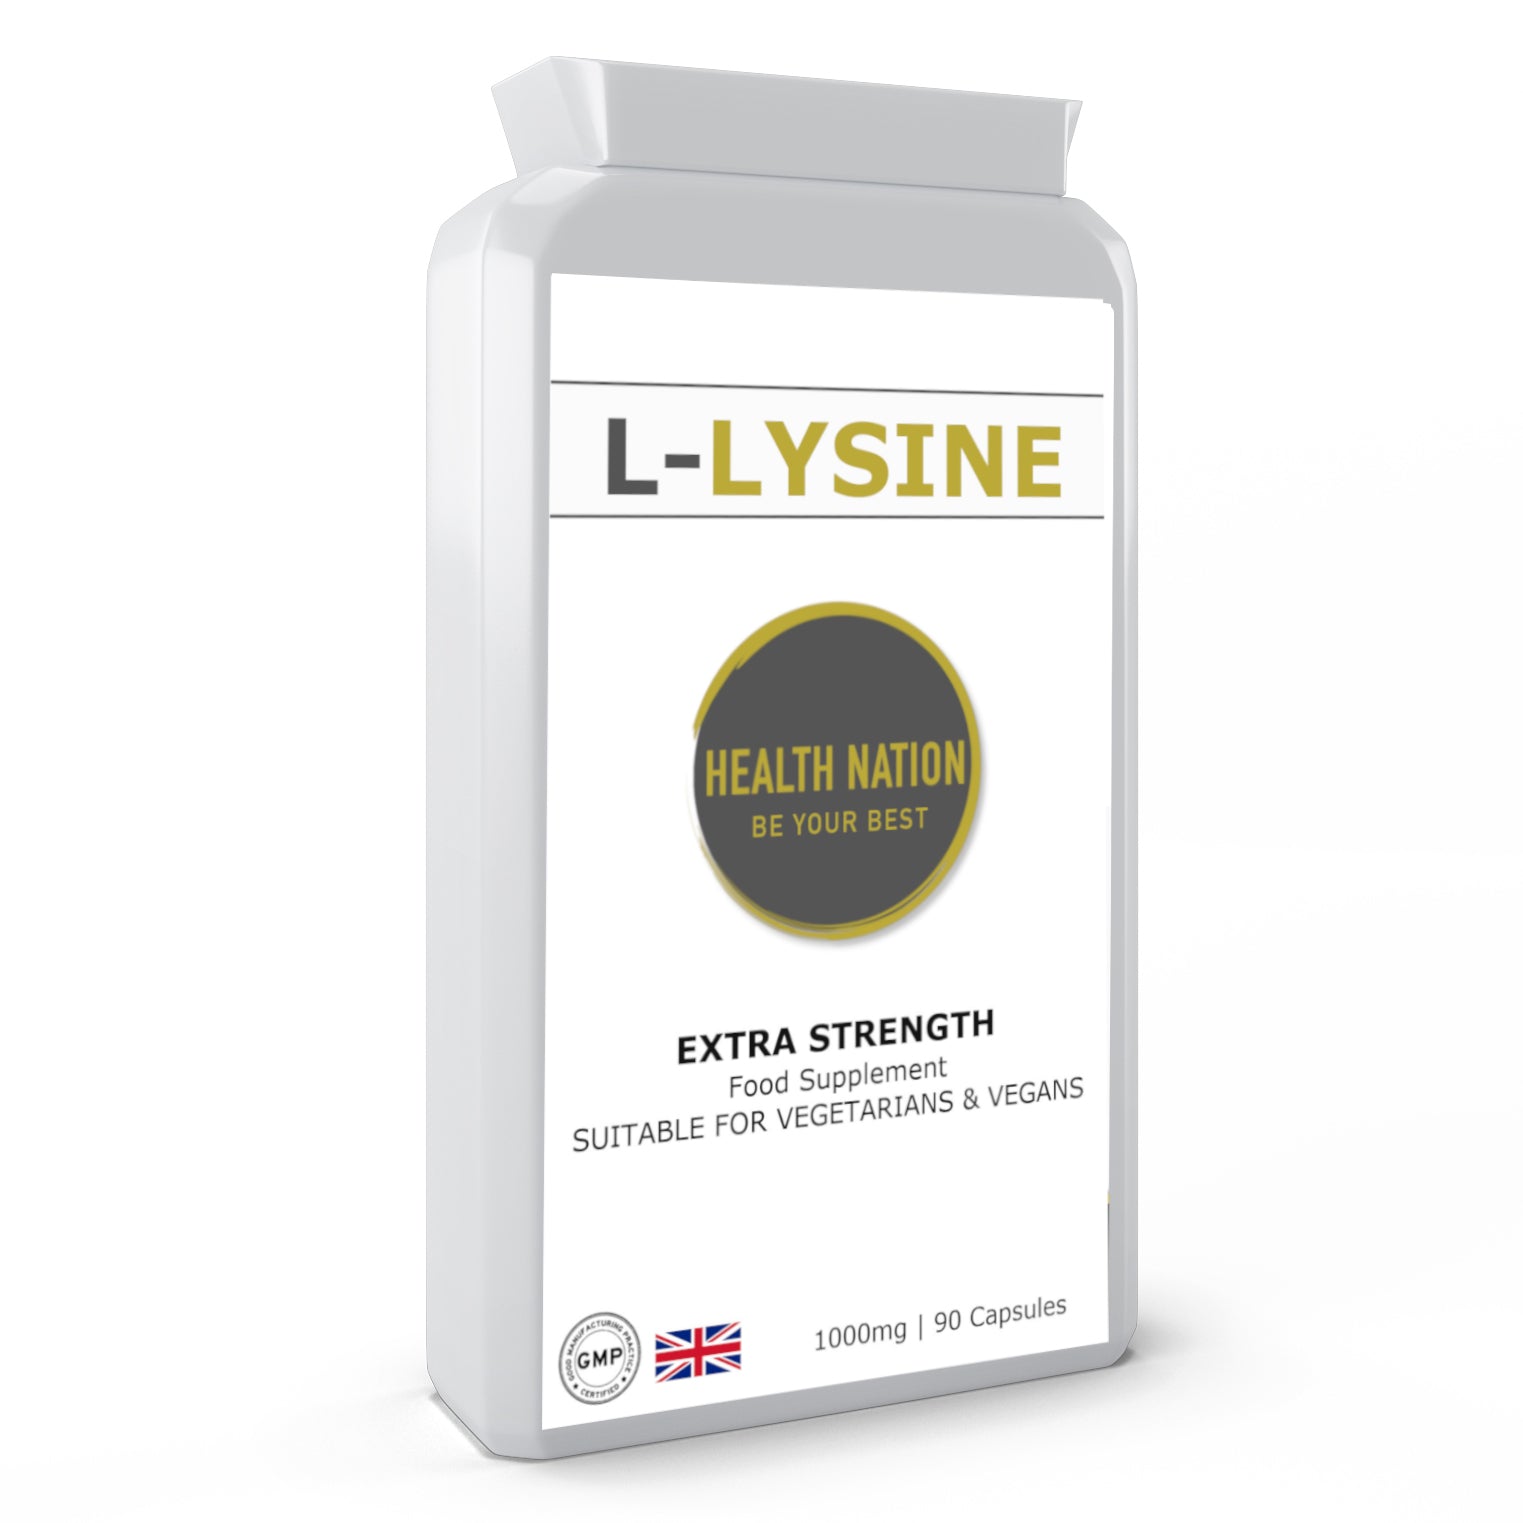 L-Lysine | Helps with Anxiety, Mood, Energy, Gut/Digestion and Balances Blood Sugar | Made in UK | 1000mg 90 Tablets - Health Nation